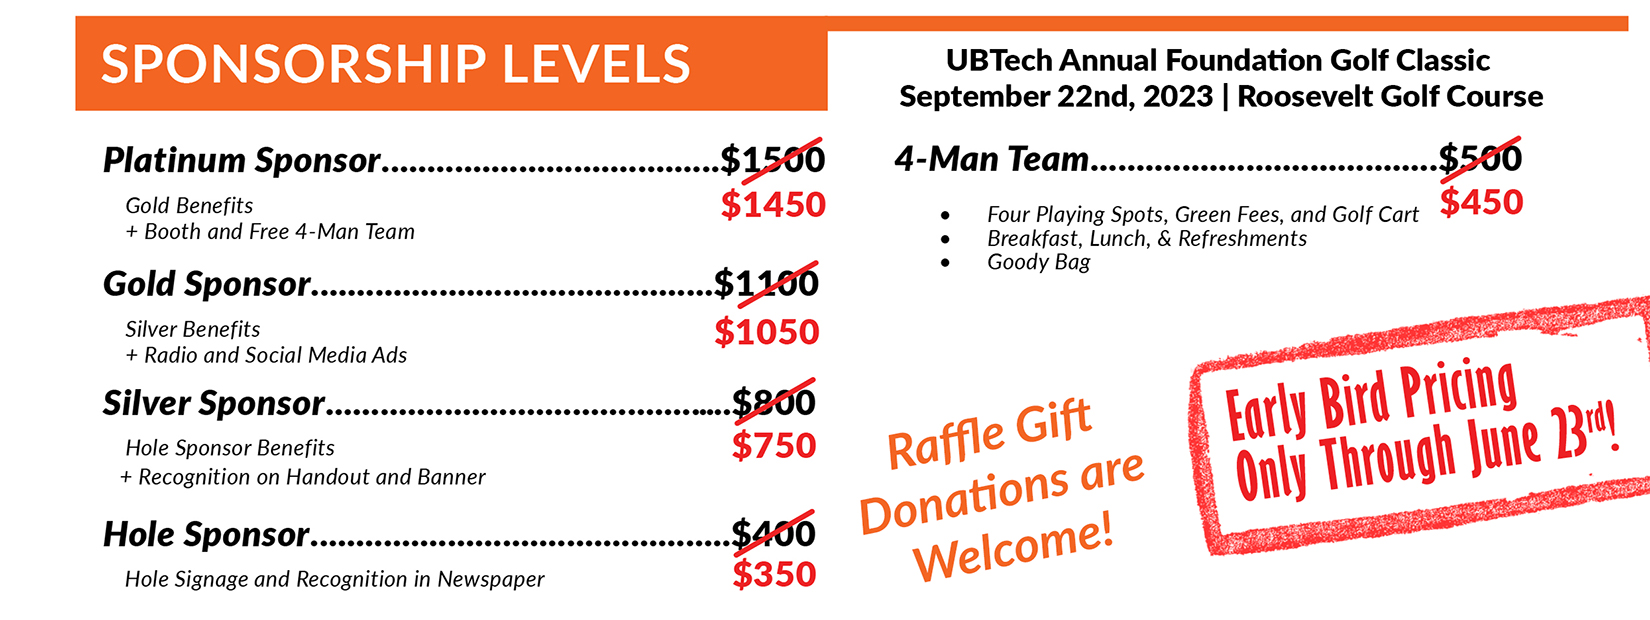 UBTech Annual Foundation Golf Classic. September 23rd 2023. 4-man scramble format. 100% goes towards scholarships. 100% stays local. Over $100,000 raised. Over 50 scholarships awarded. Early bird pricing now through June 23rd. Sponsorship levels: Platinum ($1450; includes gold benefits plus a booth and a free 4-man team), Gold ($1050; Silver benefits plus radio and social media ads), Silver ($`750; Hole sponsor benefits, recognition on handout and banner), Hole Sponsor ($350; Hole signage and Recognition in Newspaper), 4-man team ($450; Four playing spots and golf cart, meals and refreshments, Goody bag). Raffle donations welcome! Raffle tickets are $2.00 each and Mulligans are three for $10.00. Register online at www.ubtech.edu/golf